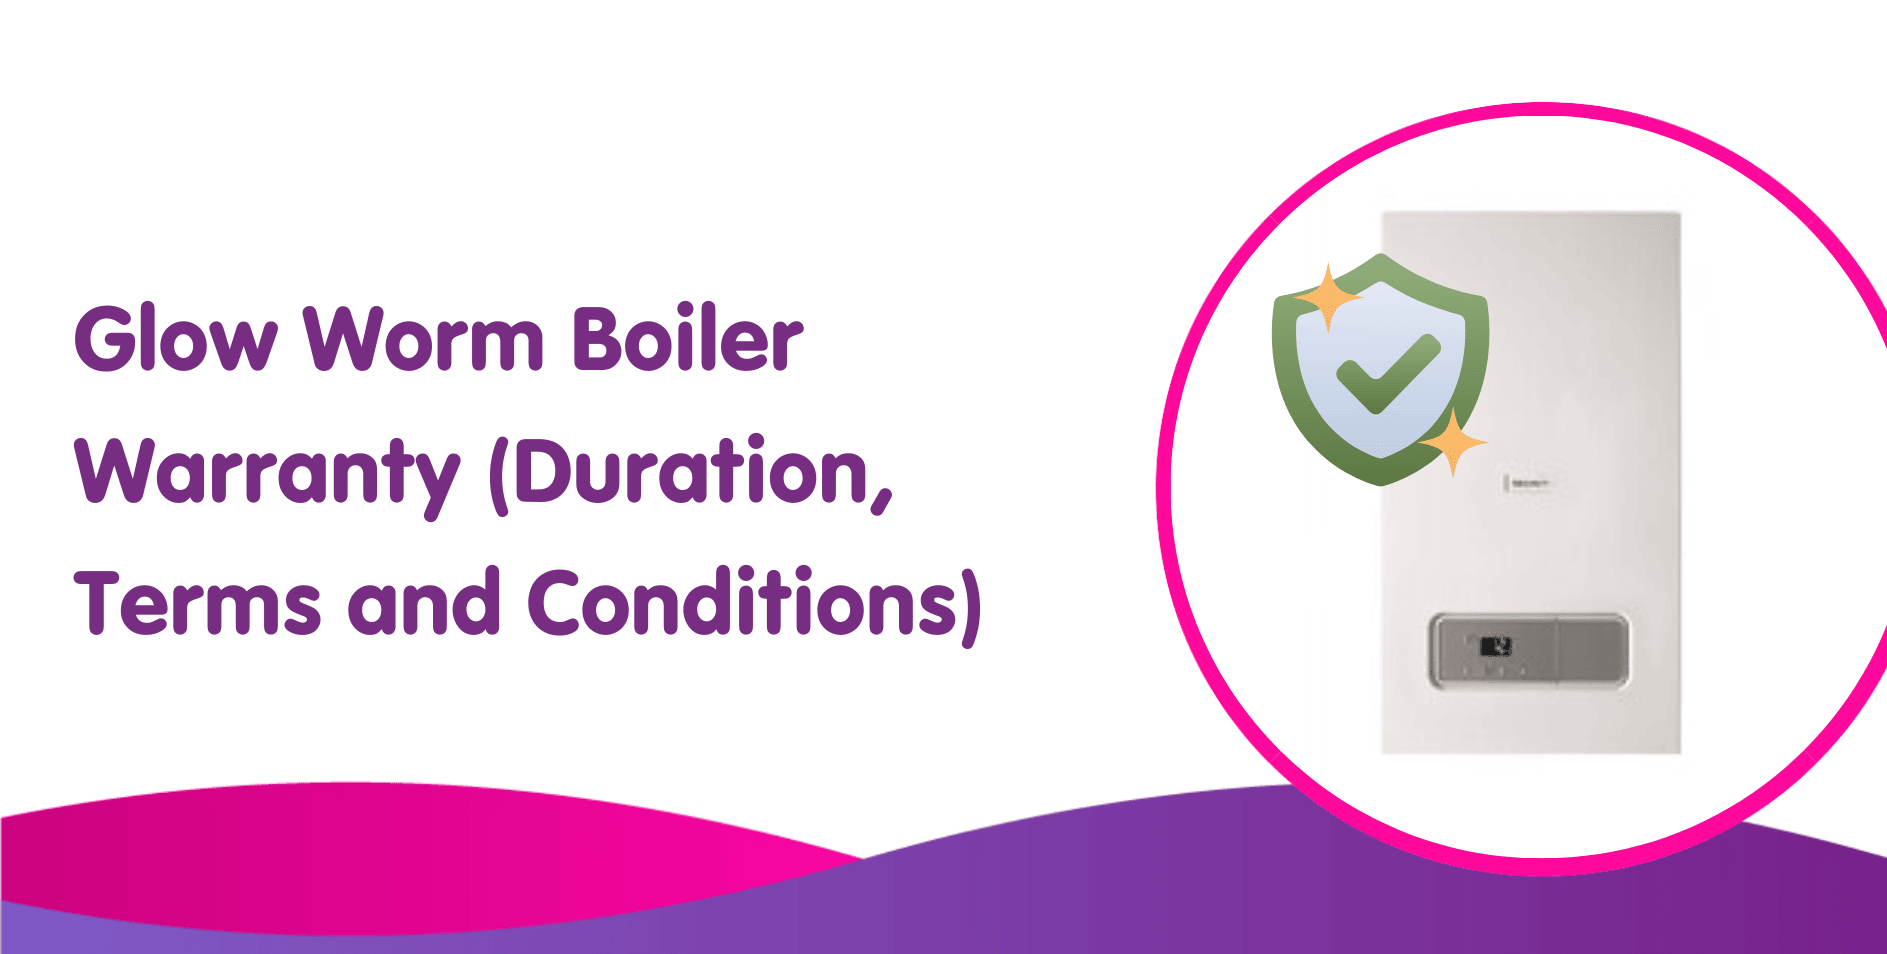 Glow Worm Boiler Warranty (Duration, Terms and Conditions)